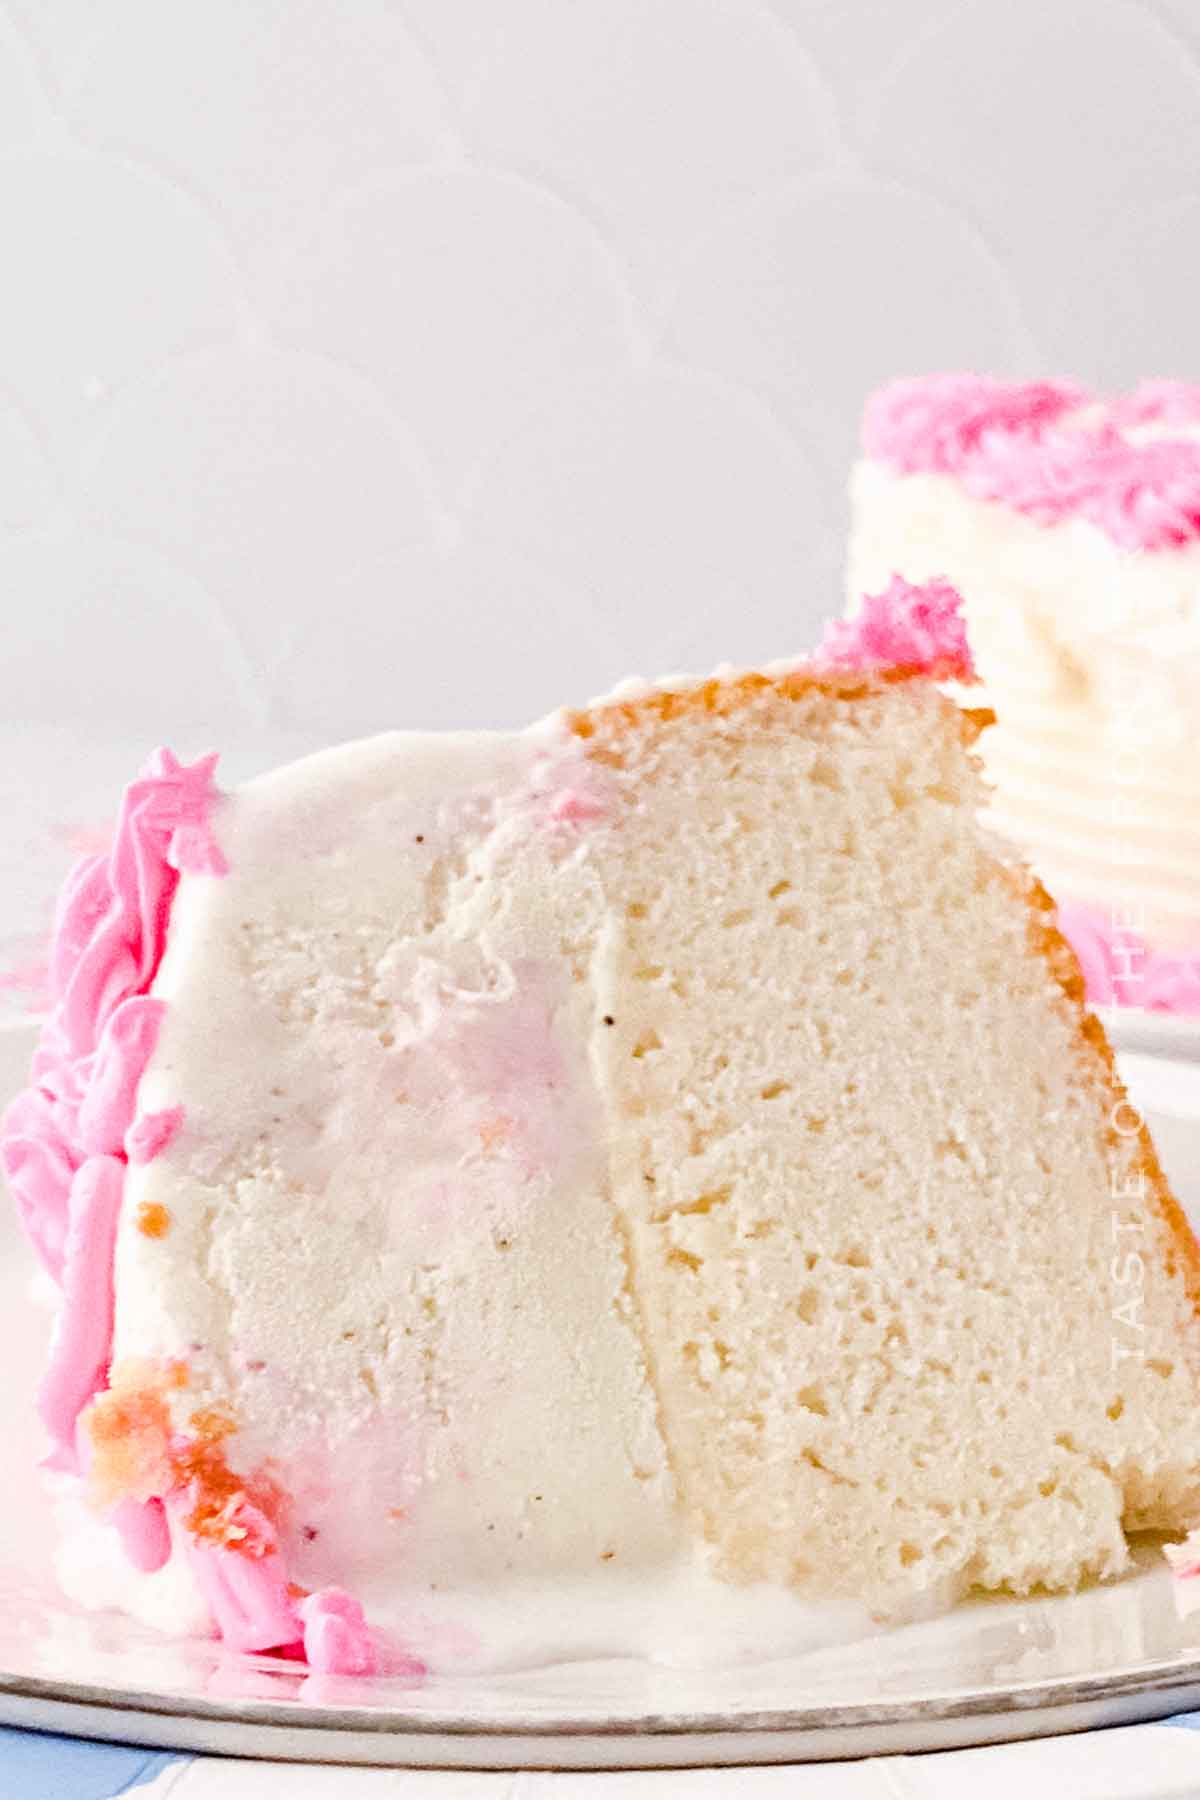 Decadent treat: How to make your own ice cream cake